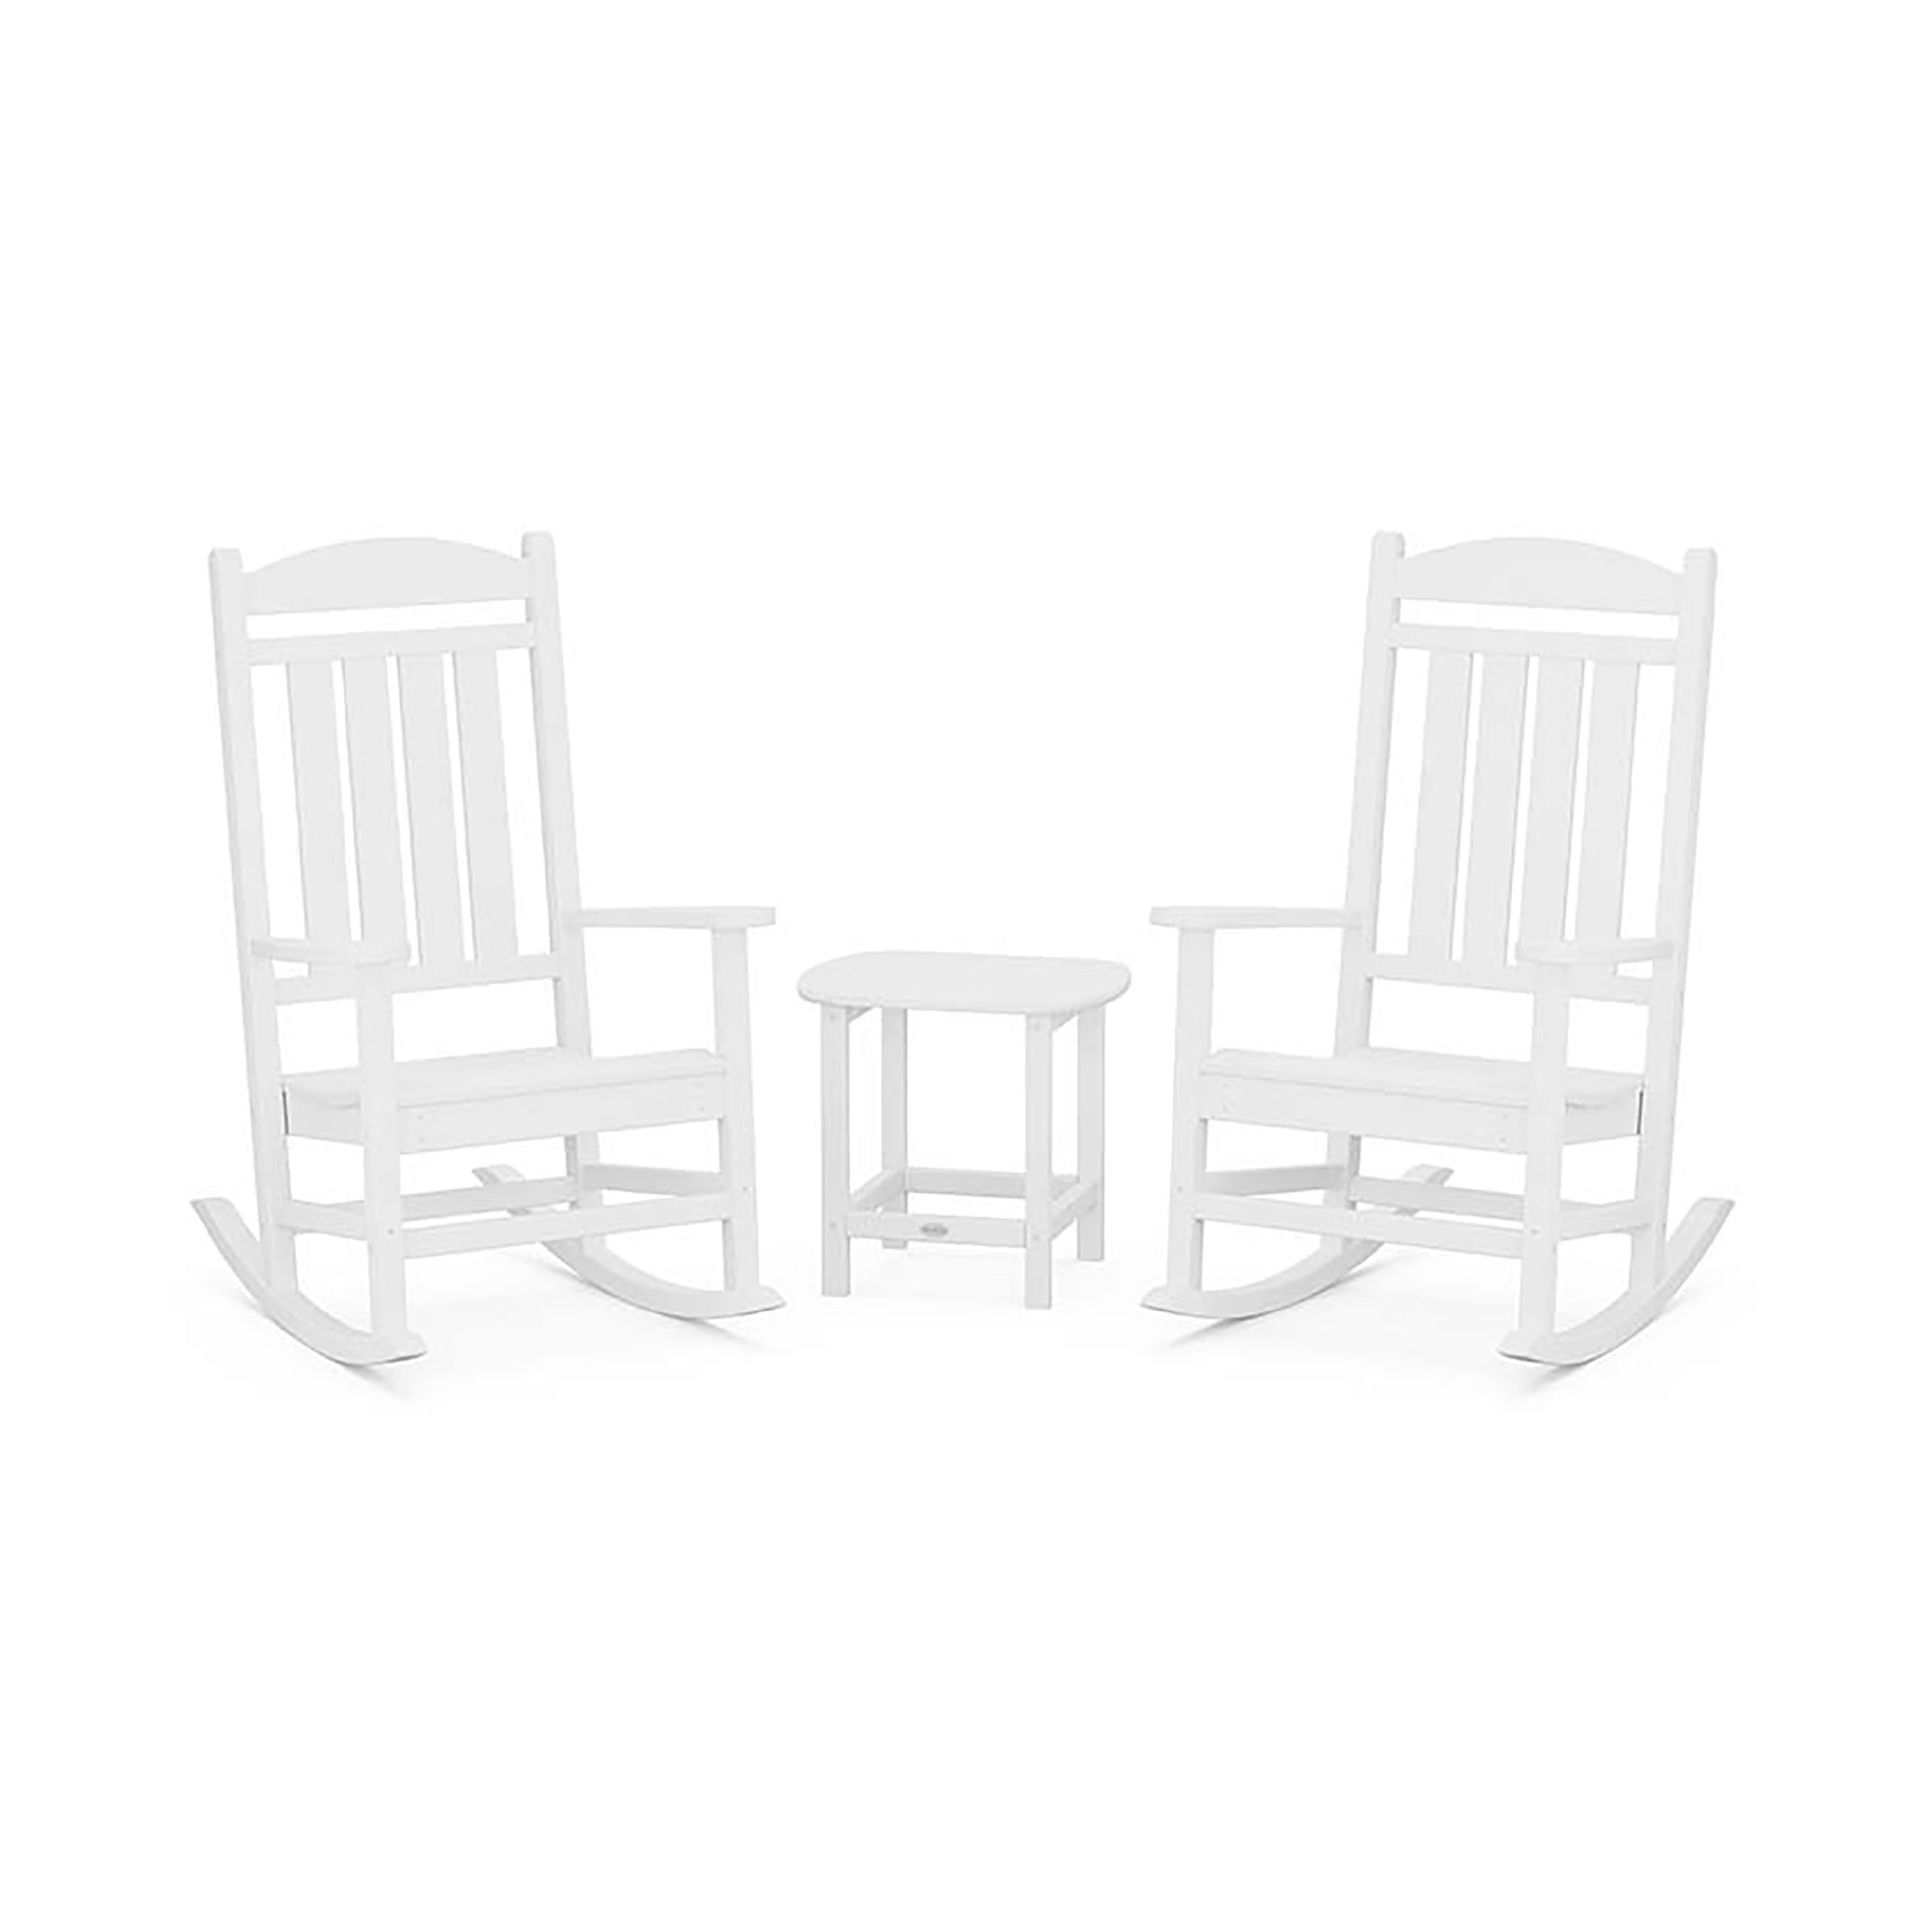 Two white POLYWOOD Presidential Outdoor Rocking Chair 3-Piece Sets facing each other with a small round table between them on a plain white background.